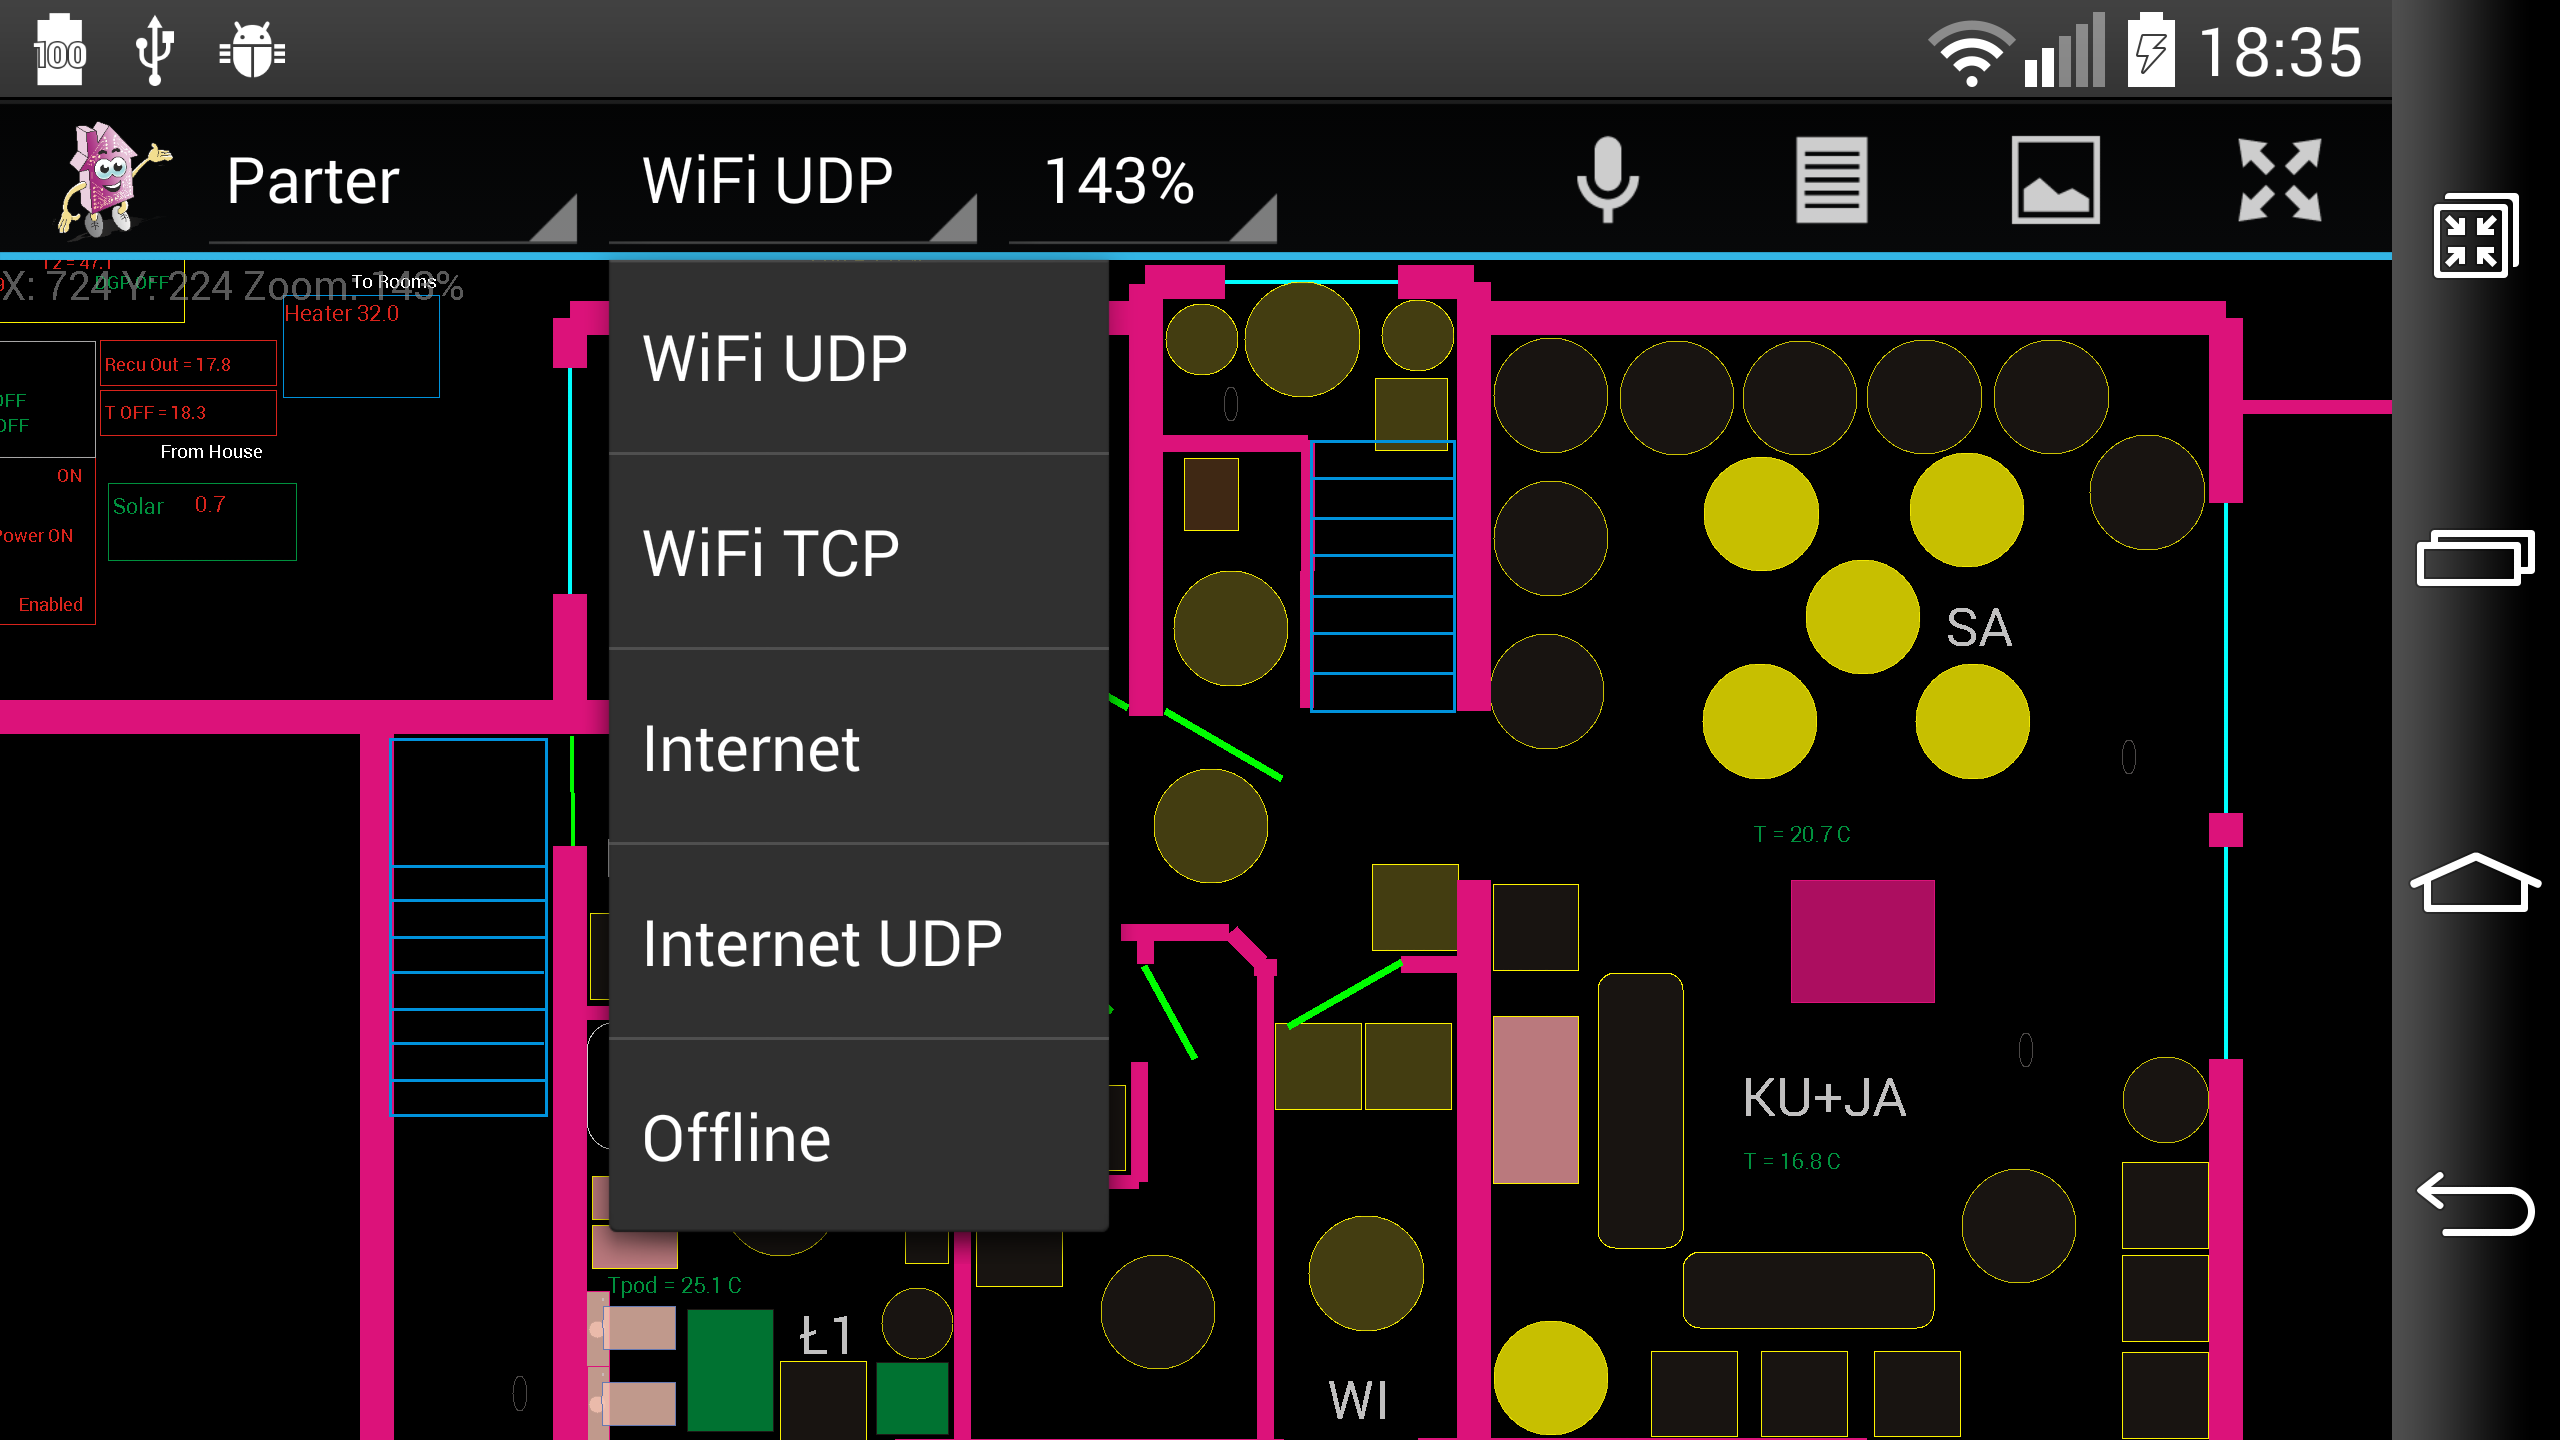  smart buildng eHouse control android 